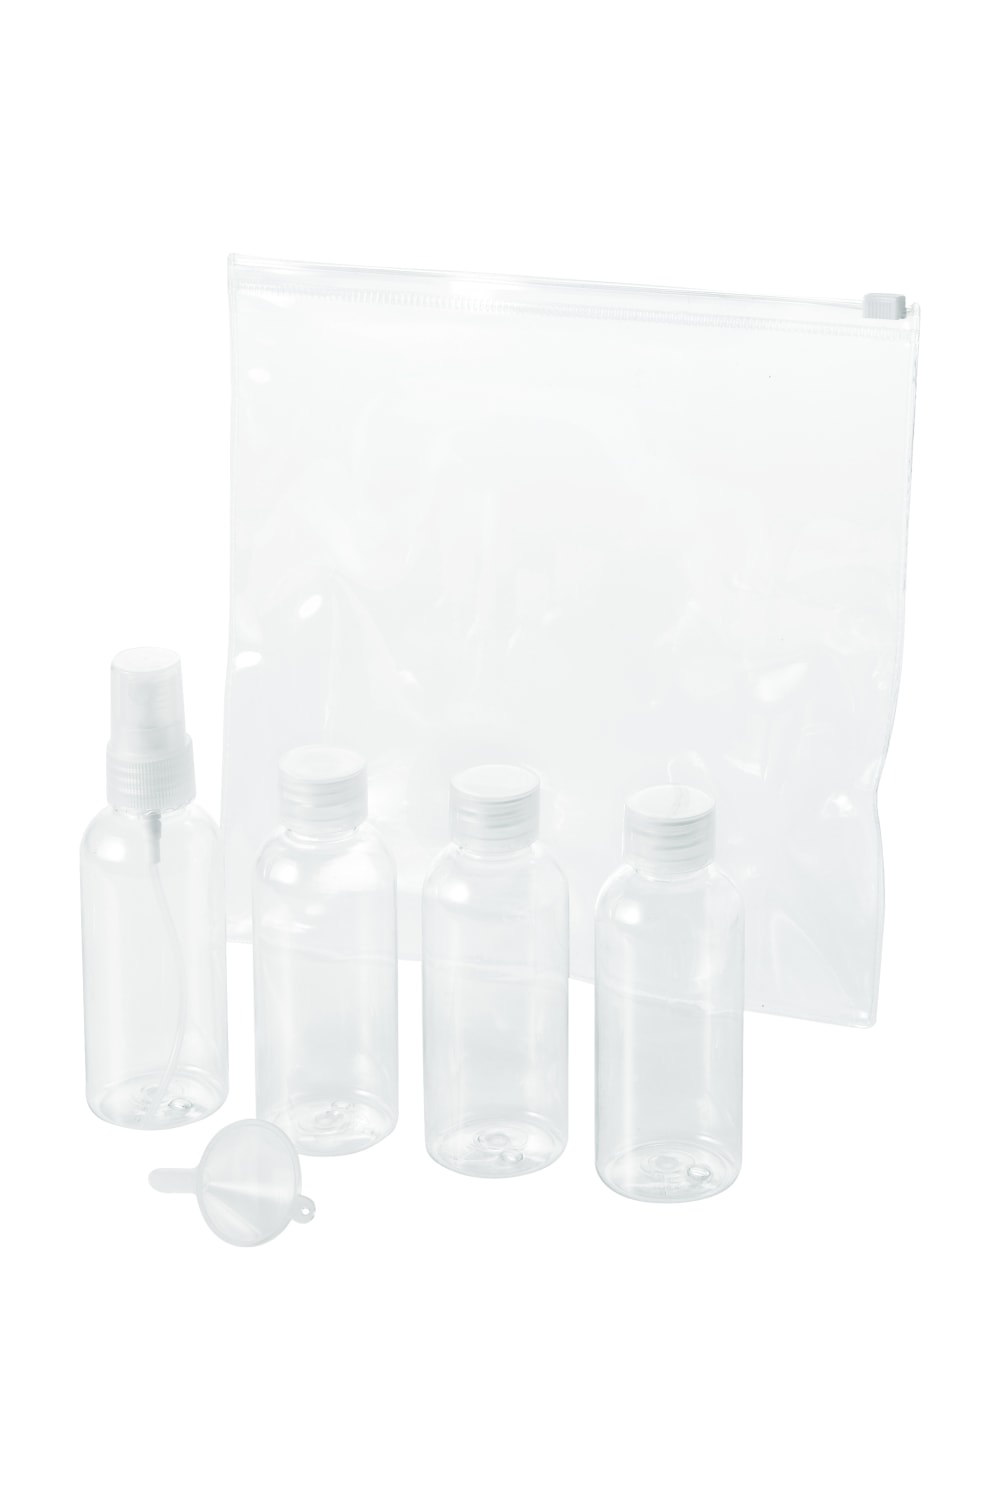 Bullet Tokyo Airline Approved Travel Bottle Set (Pack of 2) (Transparent) (7.3 x 1.5 x 7.1 inches)